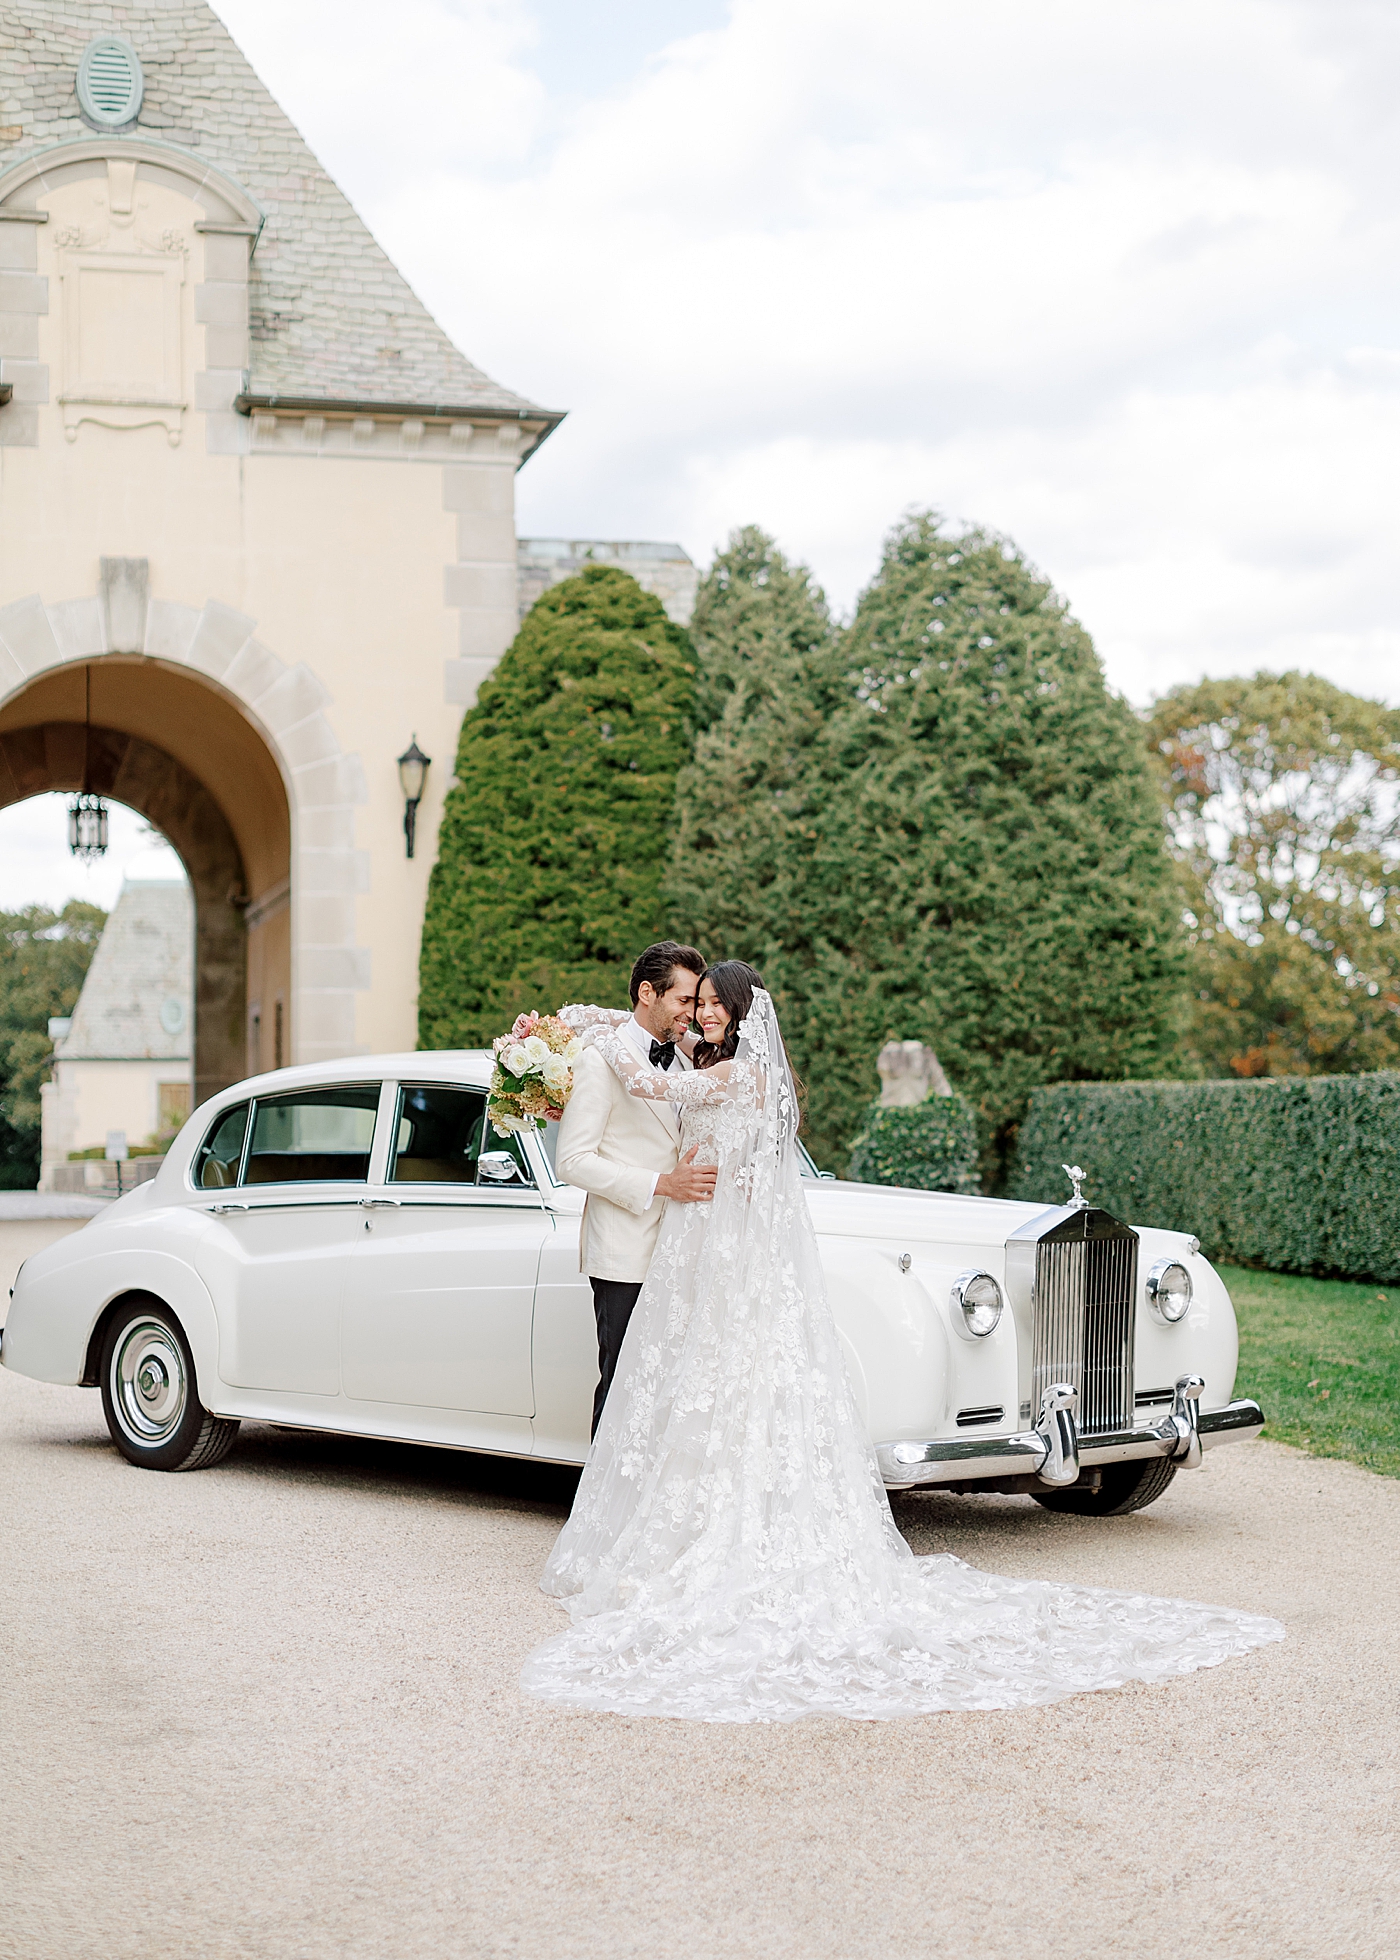 Bride and groom embracing by a classic car in a gravel driveway during Oheka castle wedding | Image by Hope Helmuth Photography